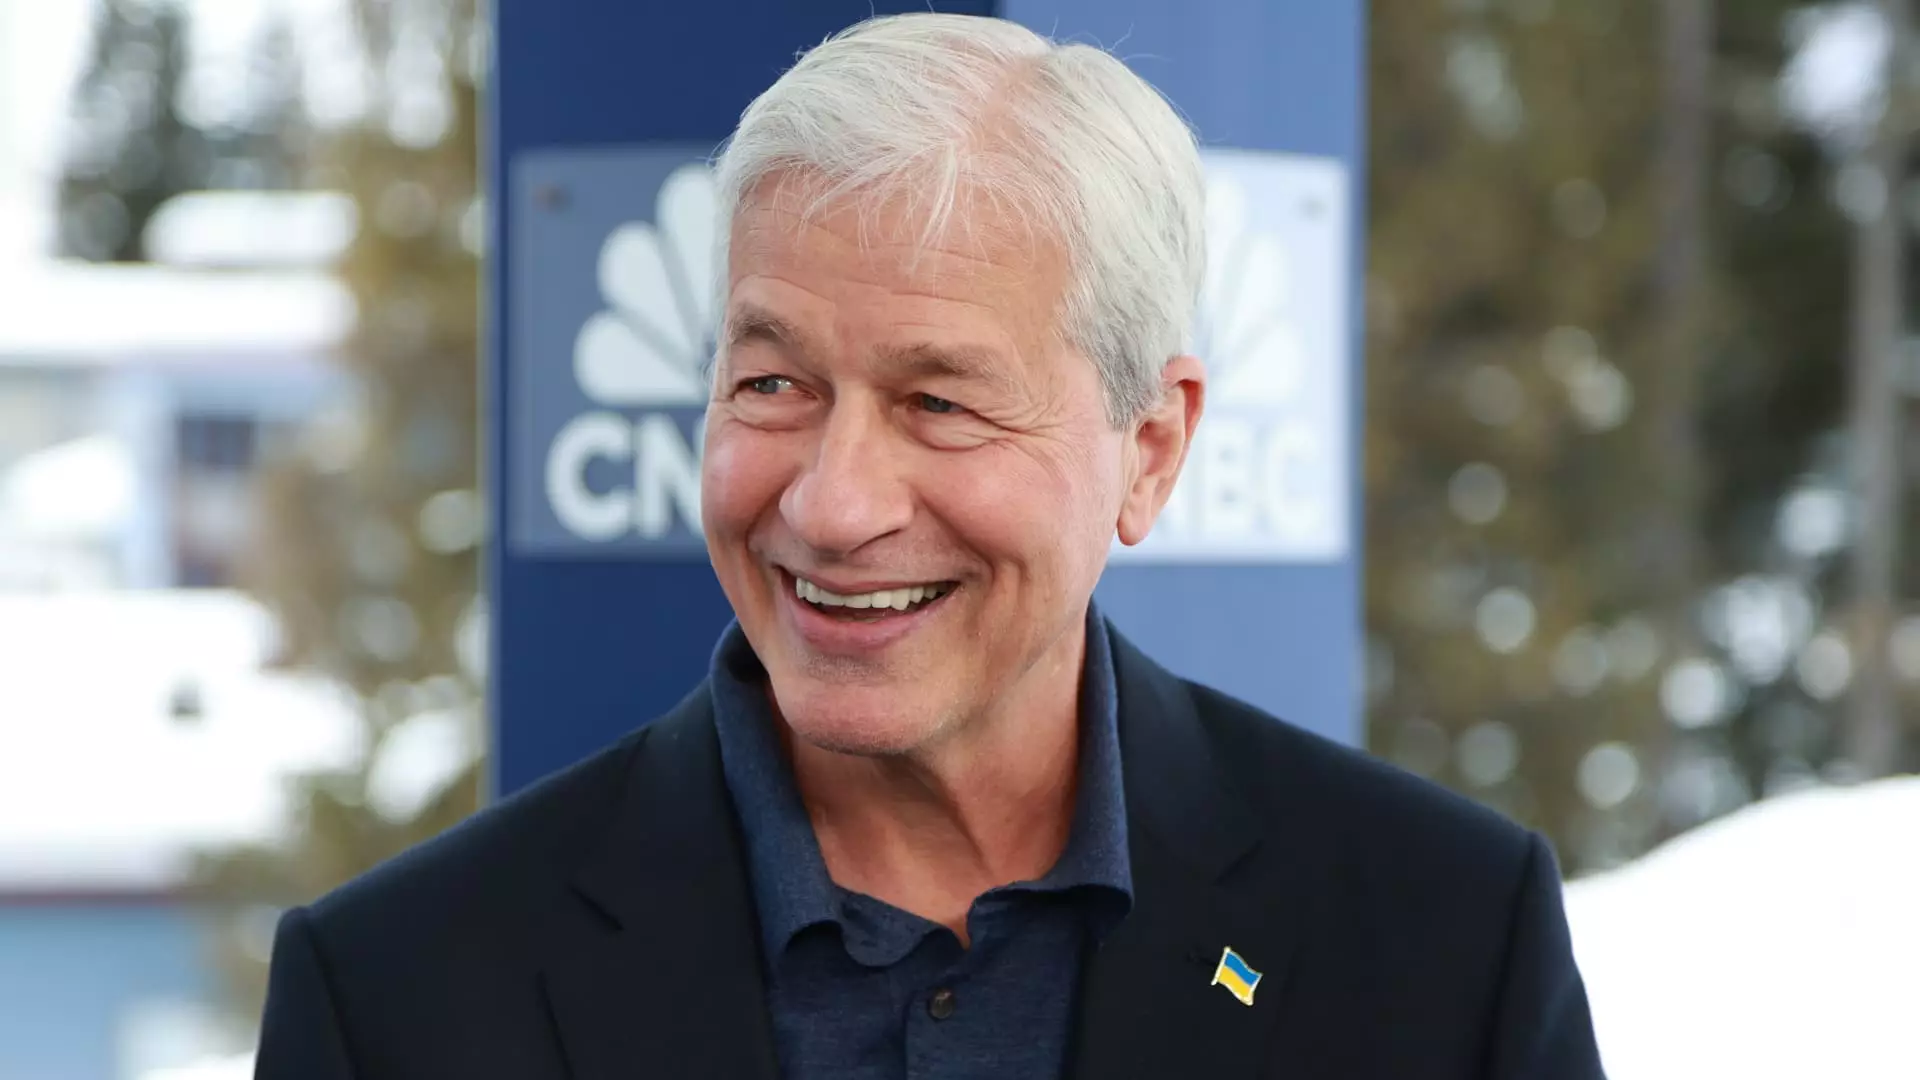 What Wall Street Expects from JPMorgan Chase’s First-Quarter Earnings Report